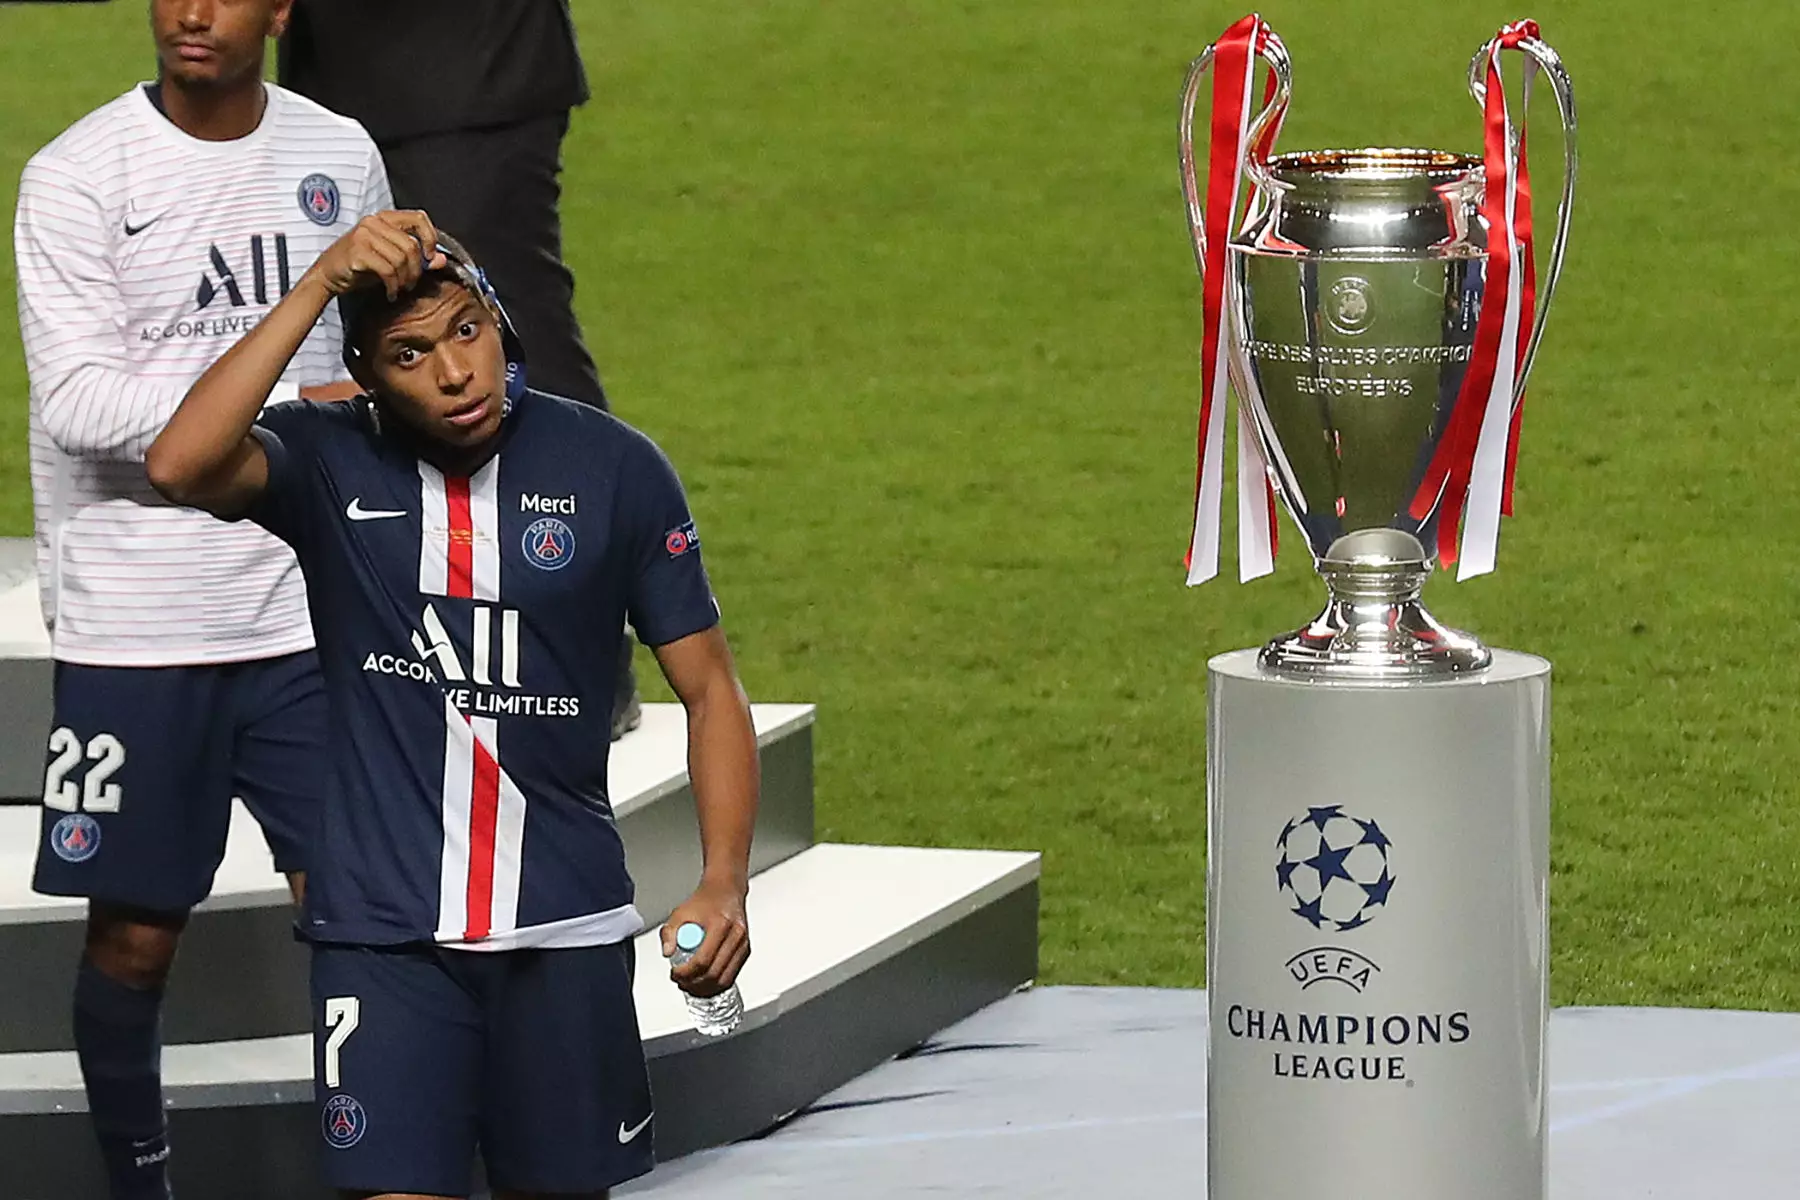 Kylian Mbappe missed out on winning the Champions League when PSG lost to Bayern Munich in the 2020 final 